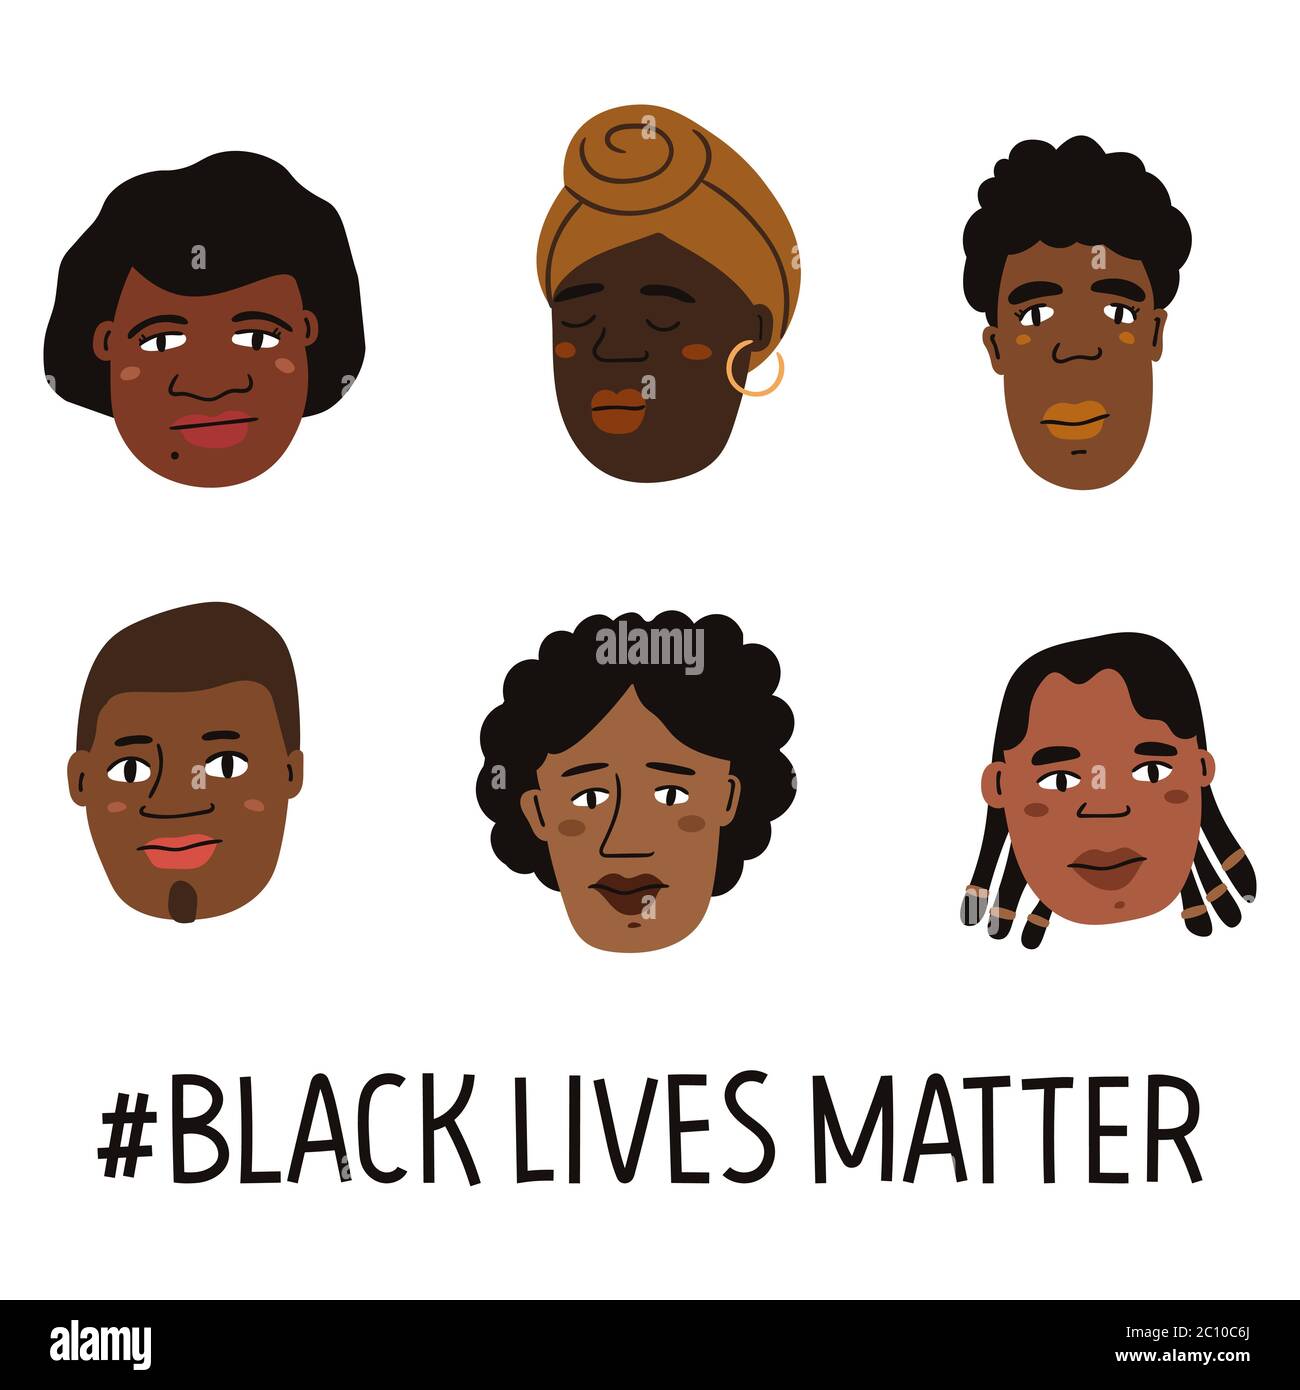 Black lives matter hand drawn poster, card collection. Campaign against racial discrimination of dark skin color. Vector Illustration. Stock Vector